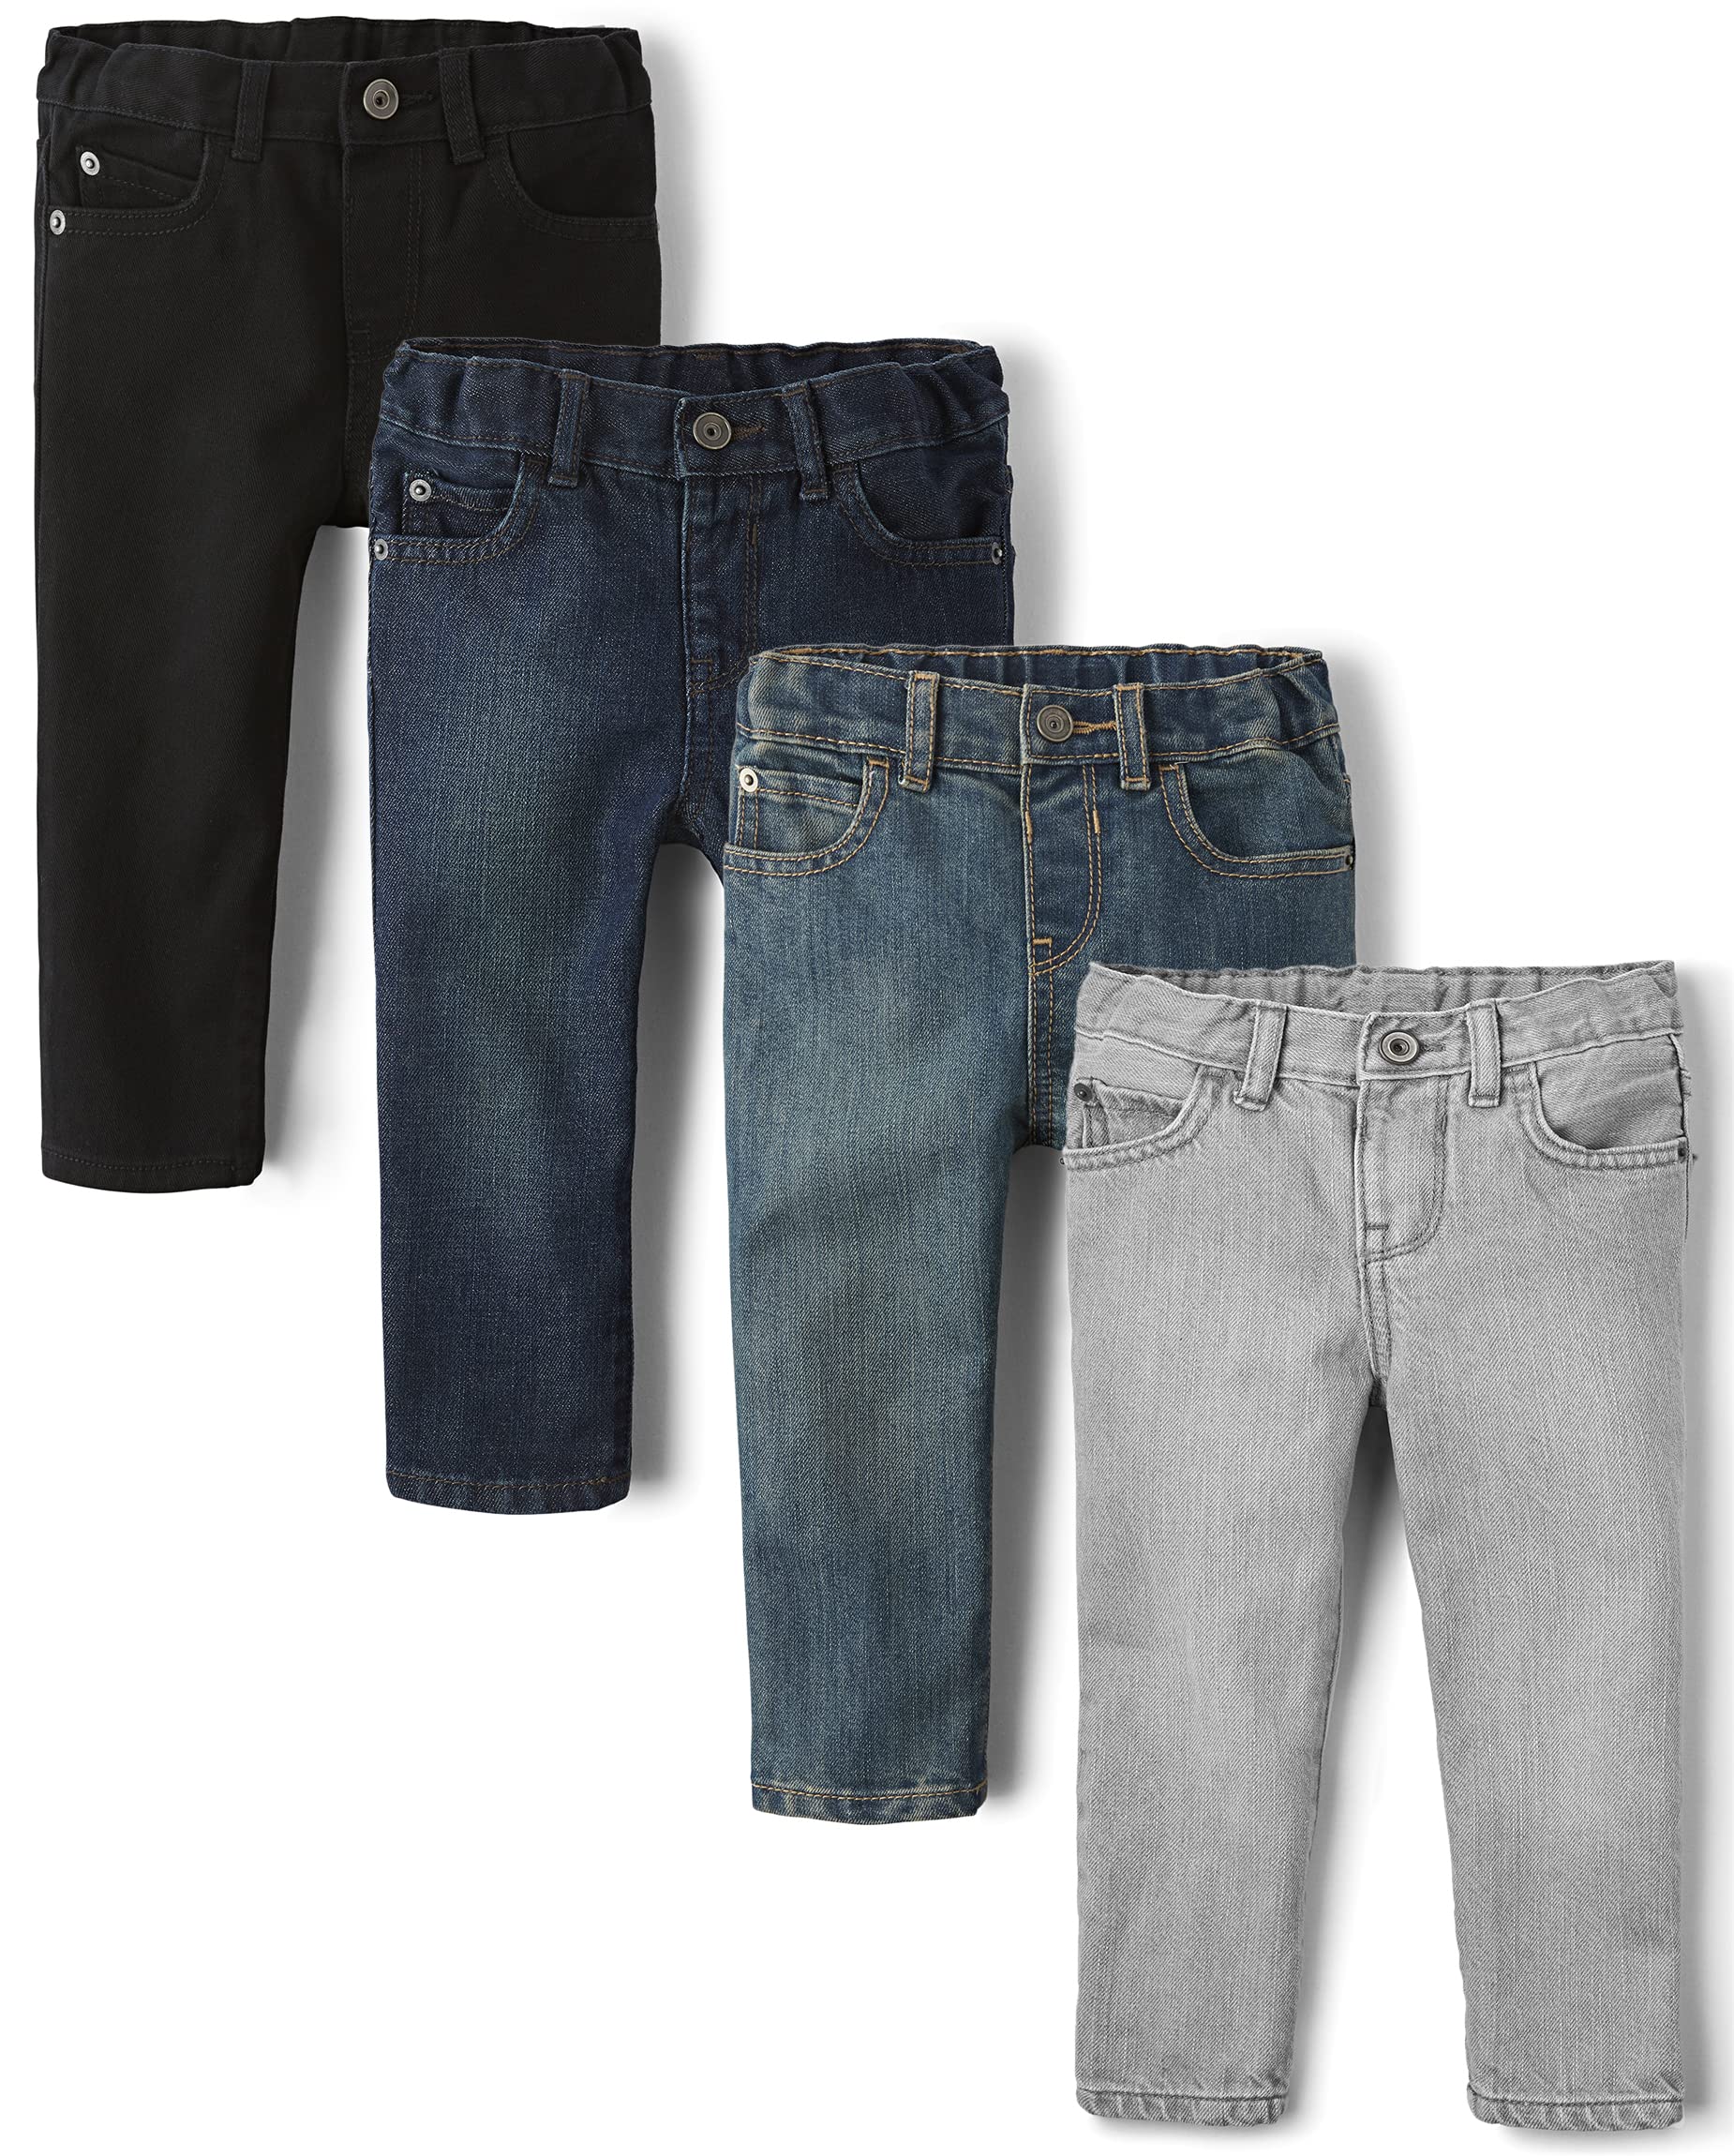 The Children's Place Baby 4 Pack and Toddler Boys Basic Skinny Jeans 4-Pack